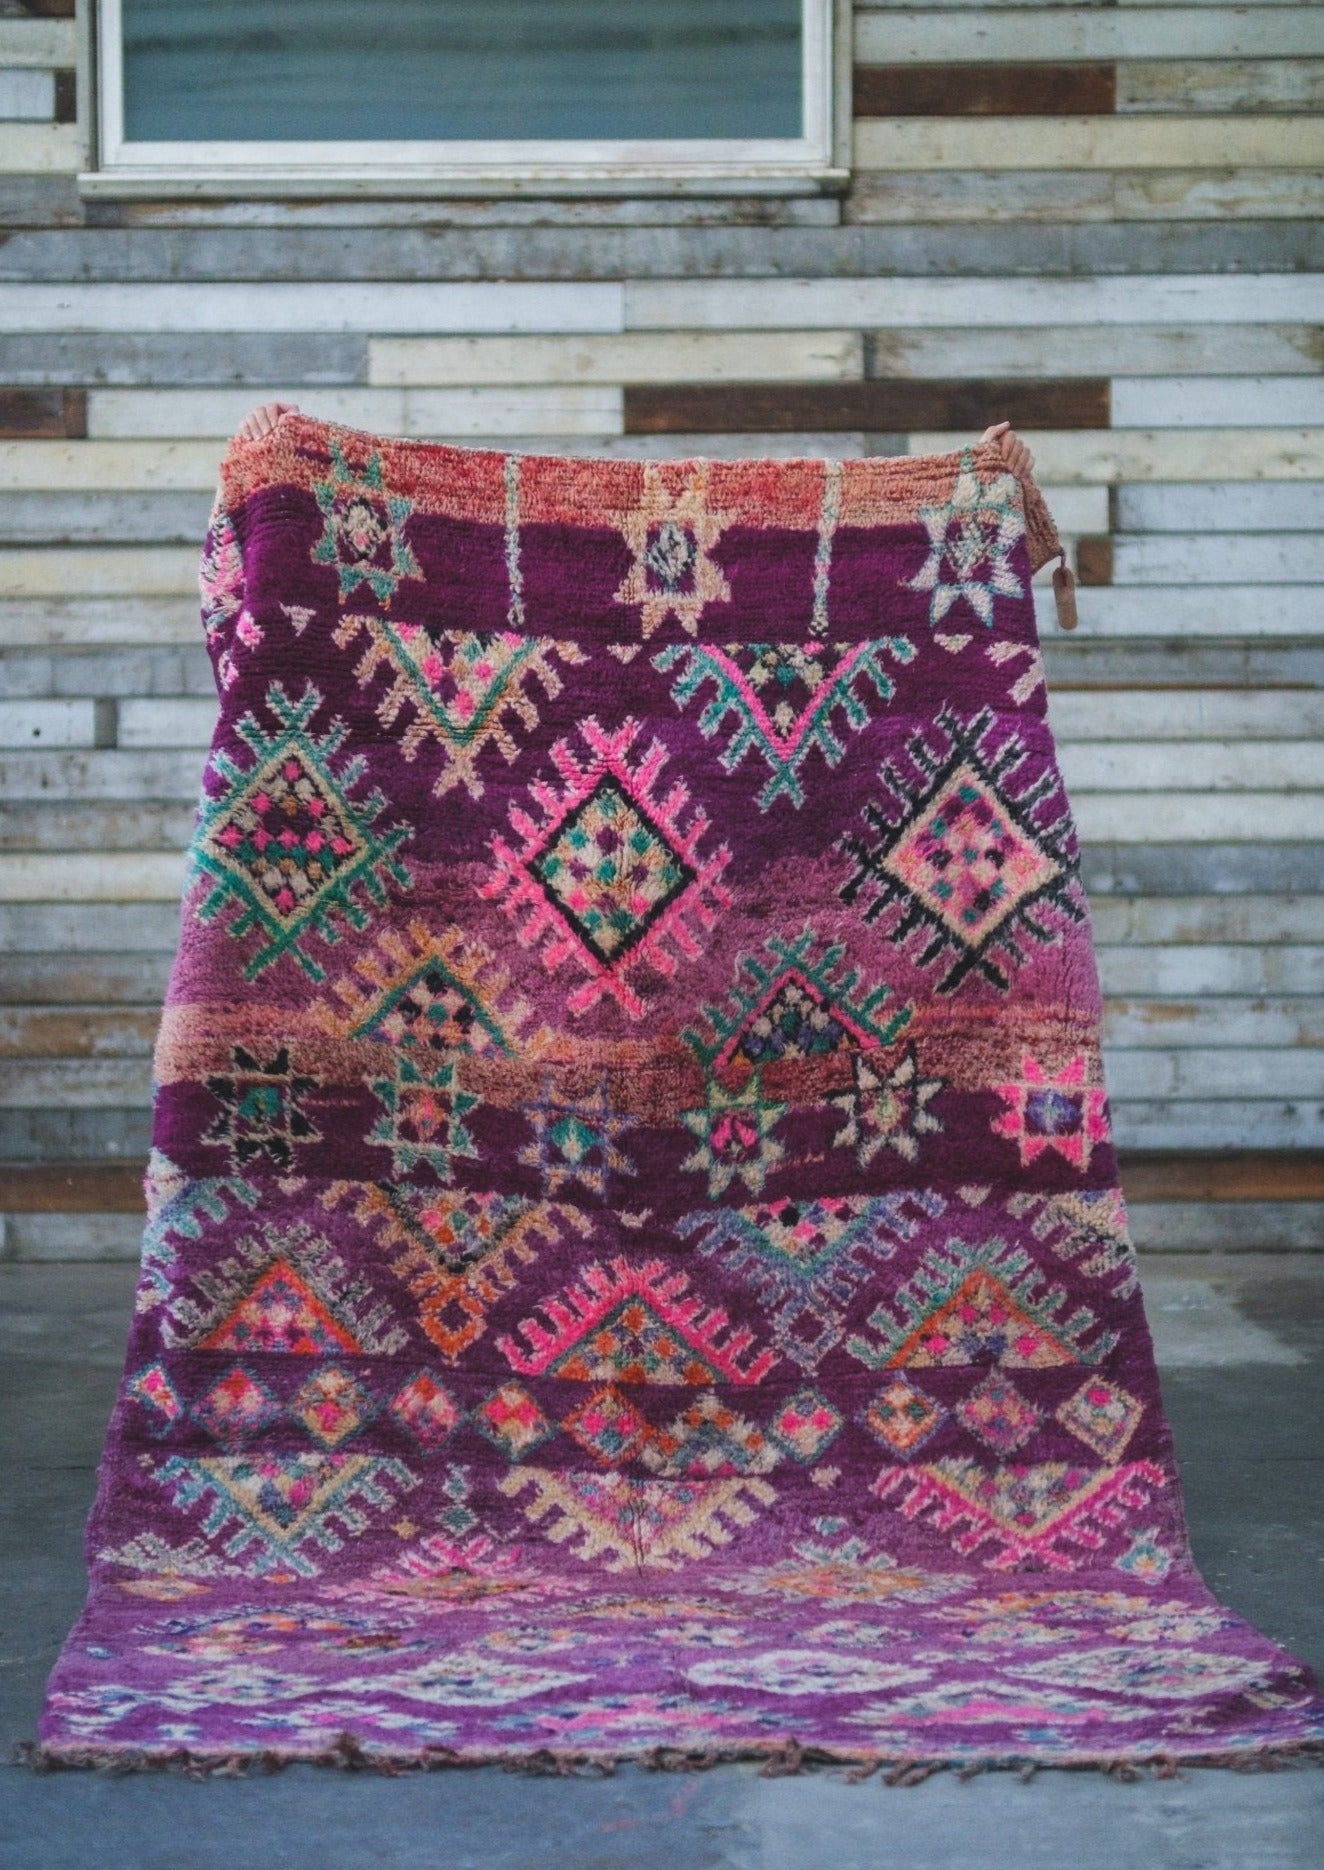 playful colors and design decorate this moroccan rug. purple pinks and details are perfect for a girls bedroom. rug is being held up against a rustic wood back drop 